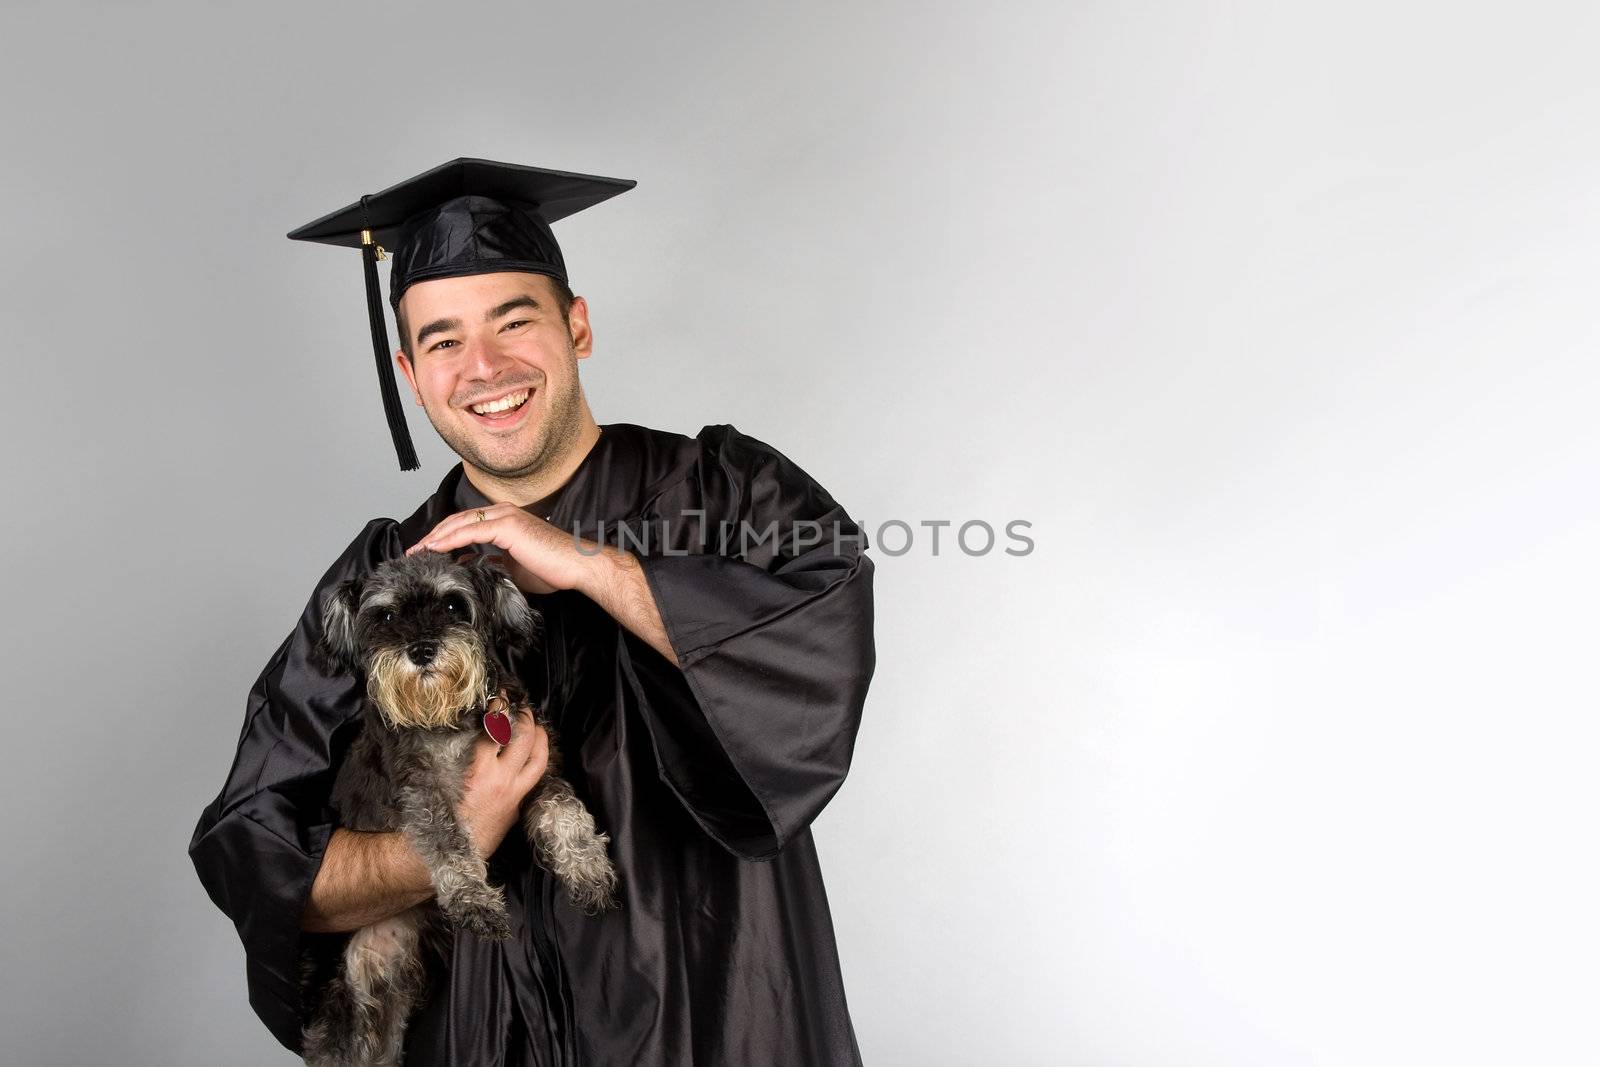 A recent college or high school graduate in his cap and gown holding his pet dog in his arms.